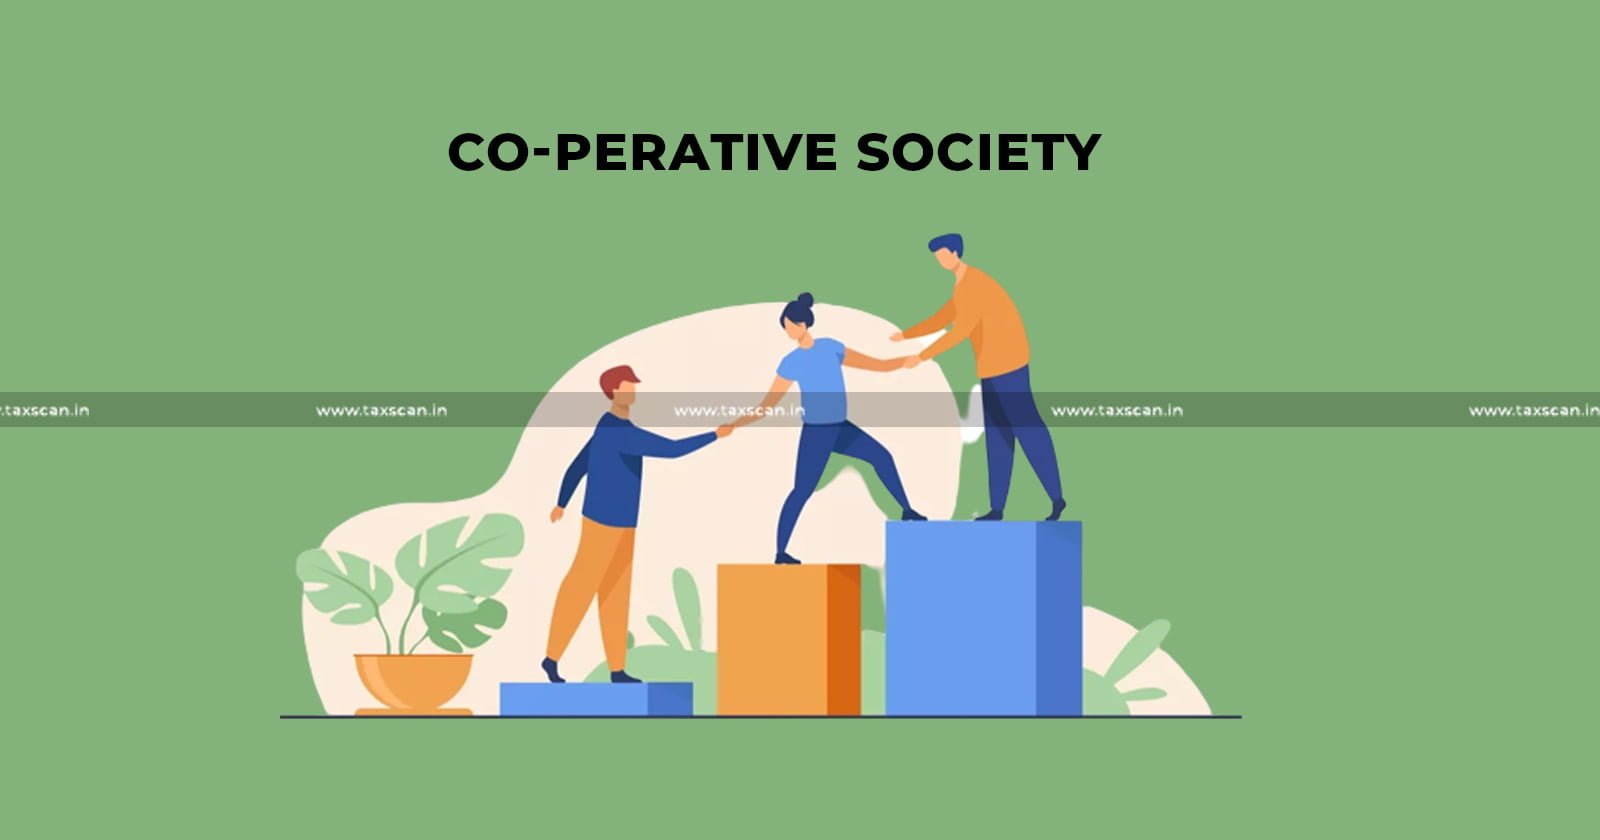 Co-operative Society - Co-operative Society involved in Banking Business - Banking Business - deduction - ITAT - Taxscan